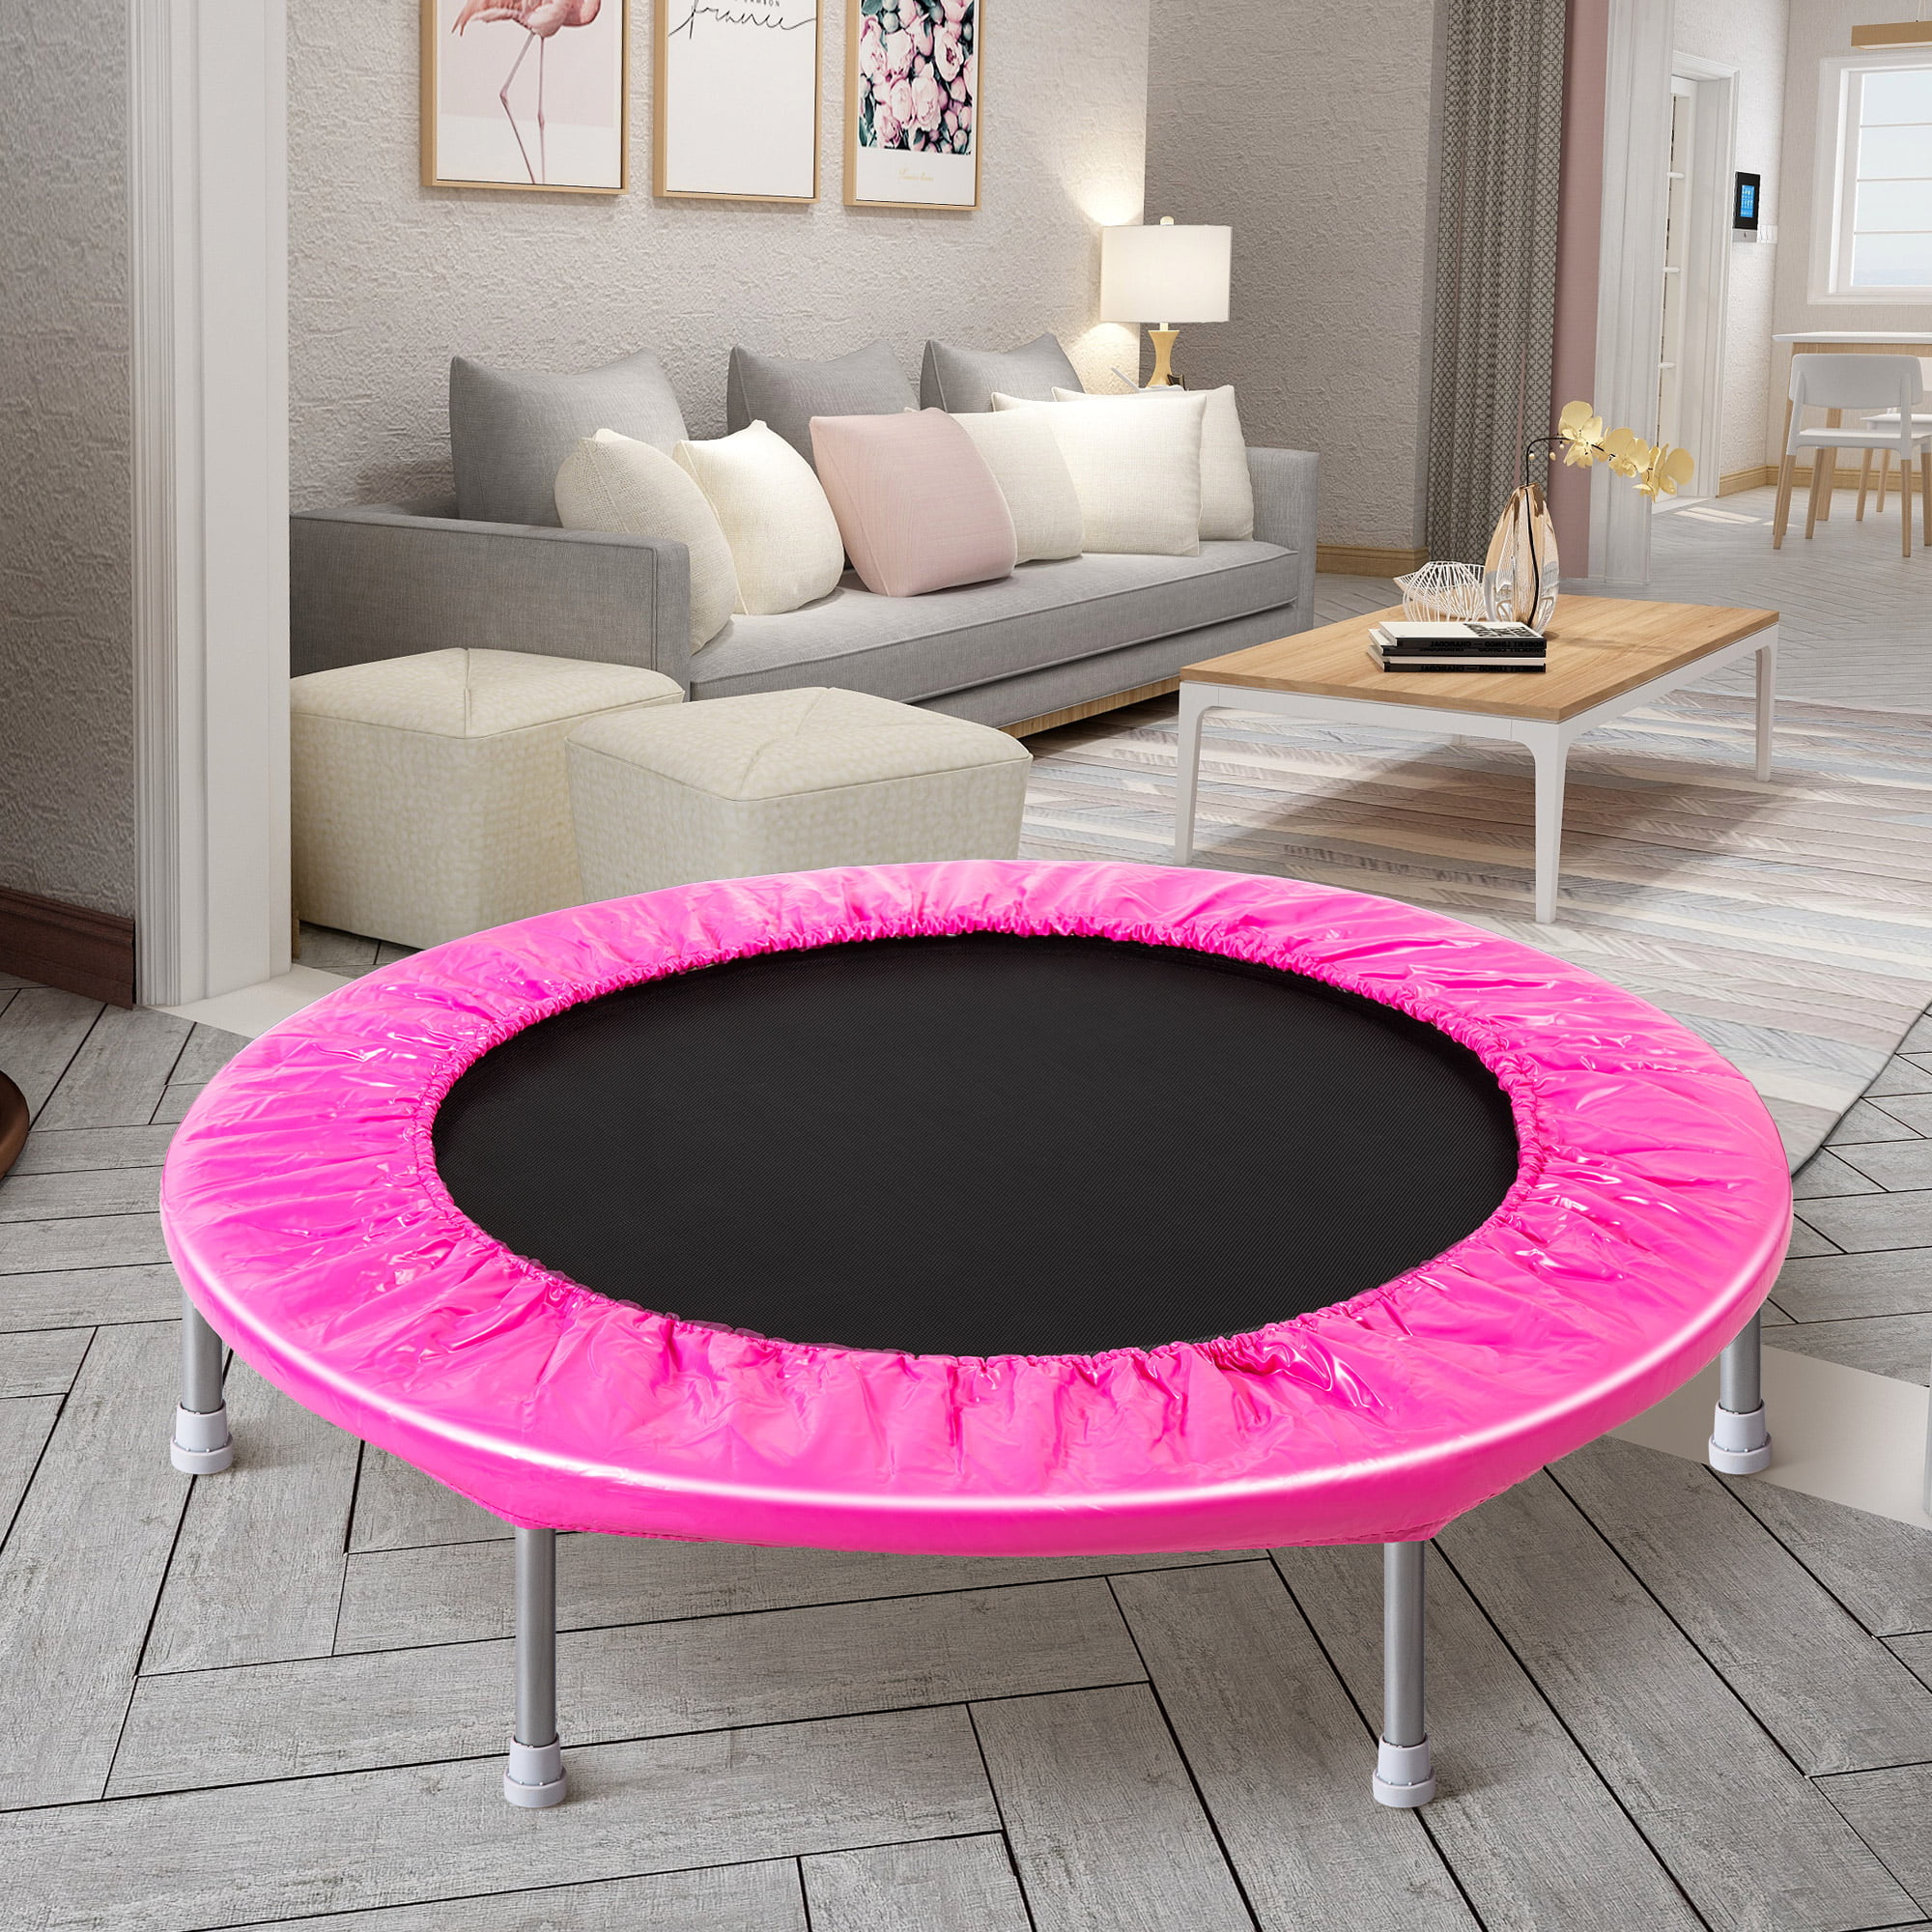 38" Trampoline Rebounder, BTMWAY Mini Indoor/Outdoor Folding Gym Fitness Trampolines, Kids Adults Folding Small Jump Exercise Rebounder Trampoline with Safty Pad, Max Load 180lbs, Pink, R633